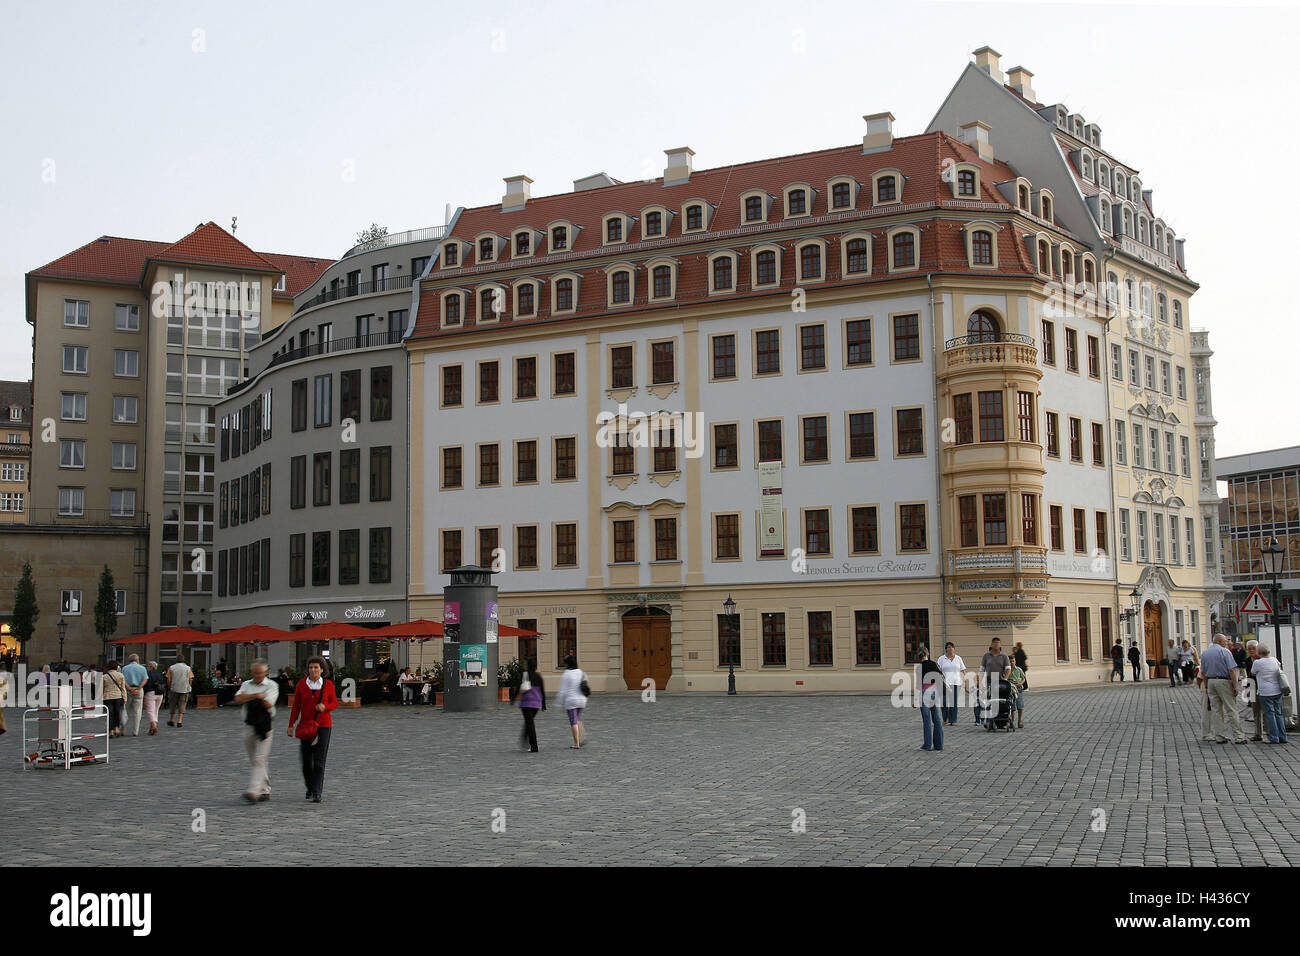 Germany, Saxony, Dresden, Old Town, new market, tourist, Stock Photo